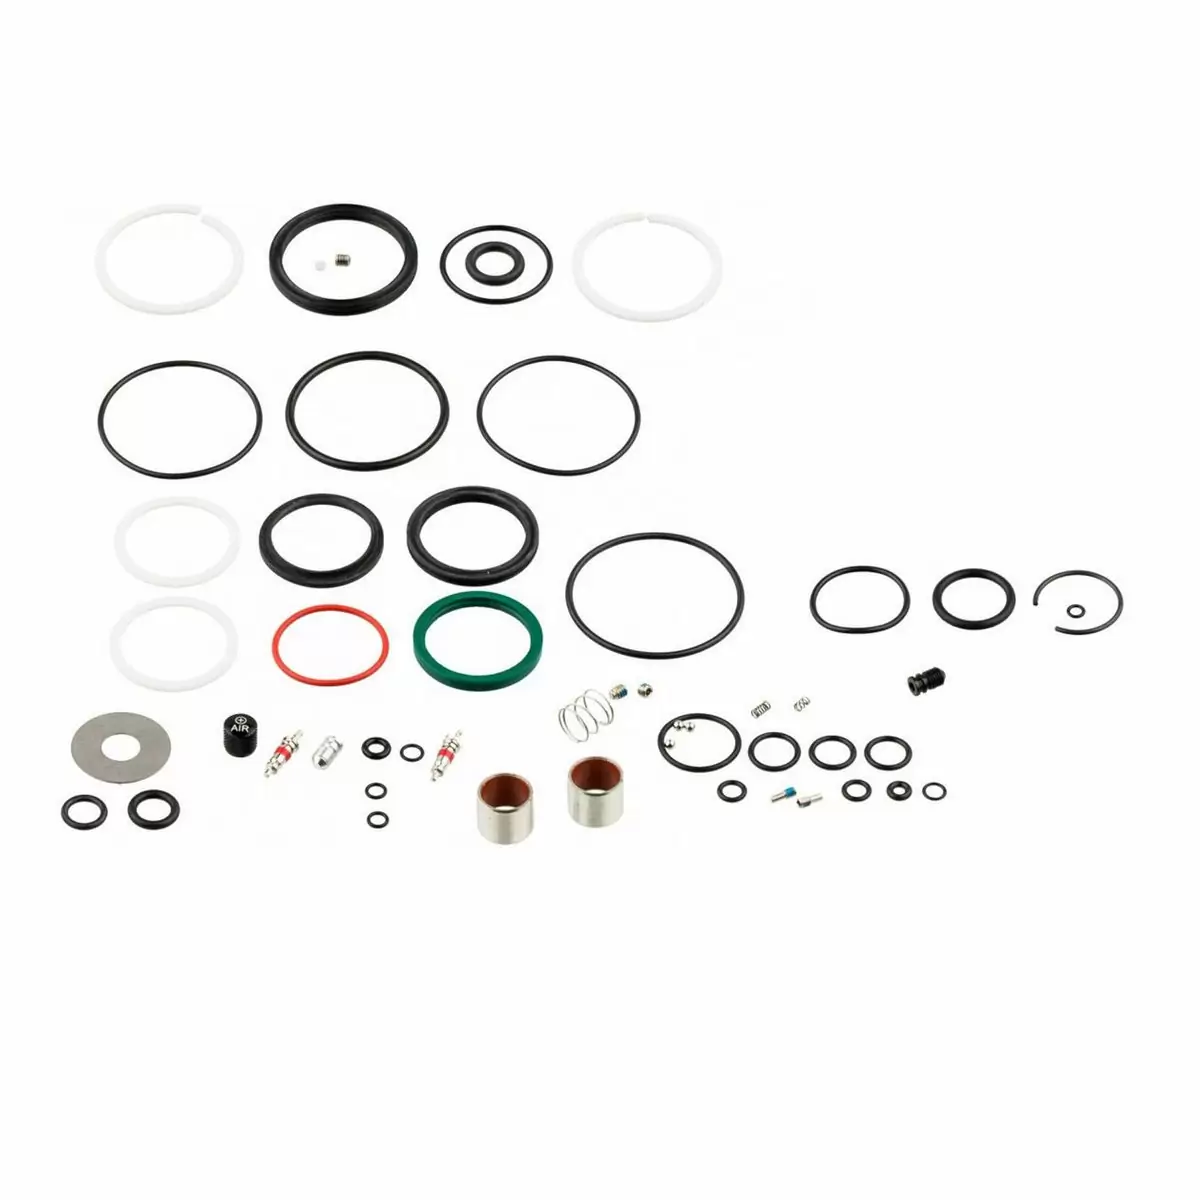 Service kit basic for Monarch RT3 / RT / RL / R from 2014 - image